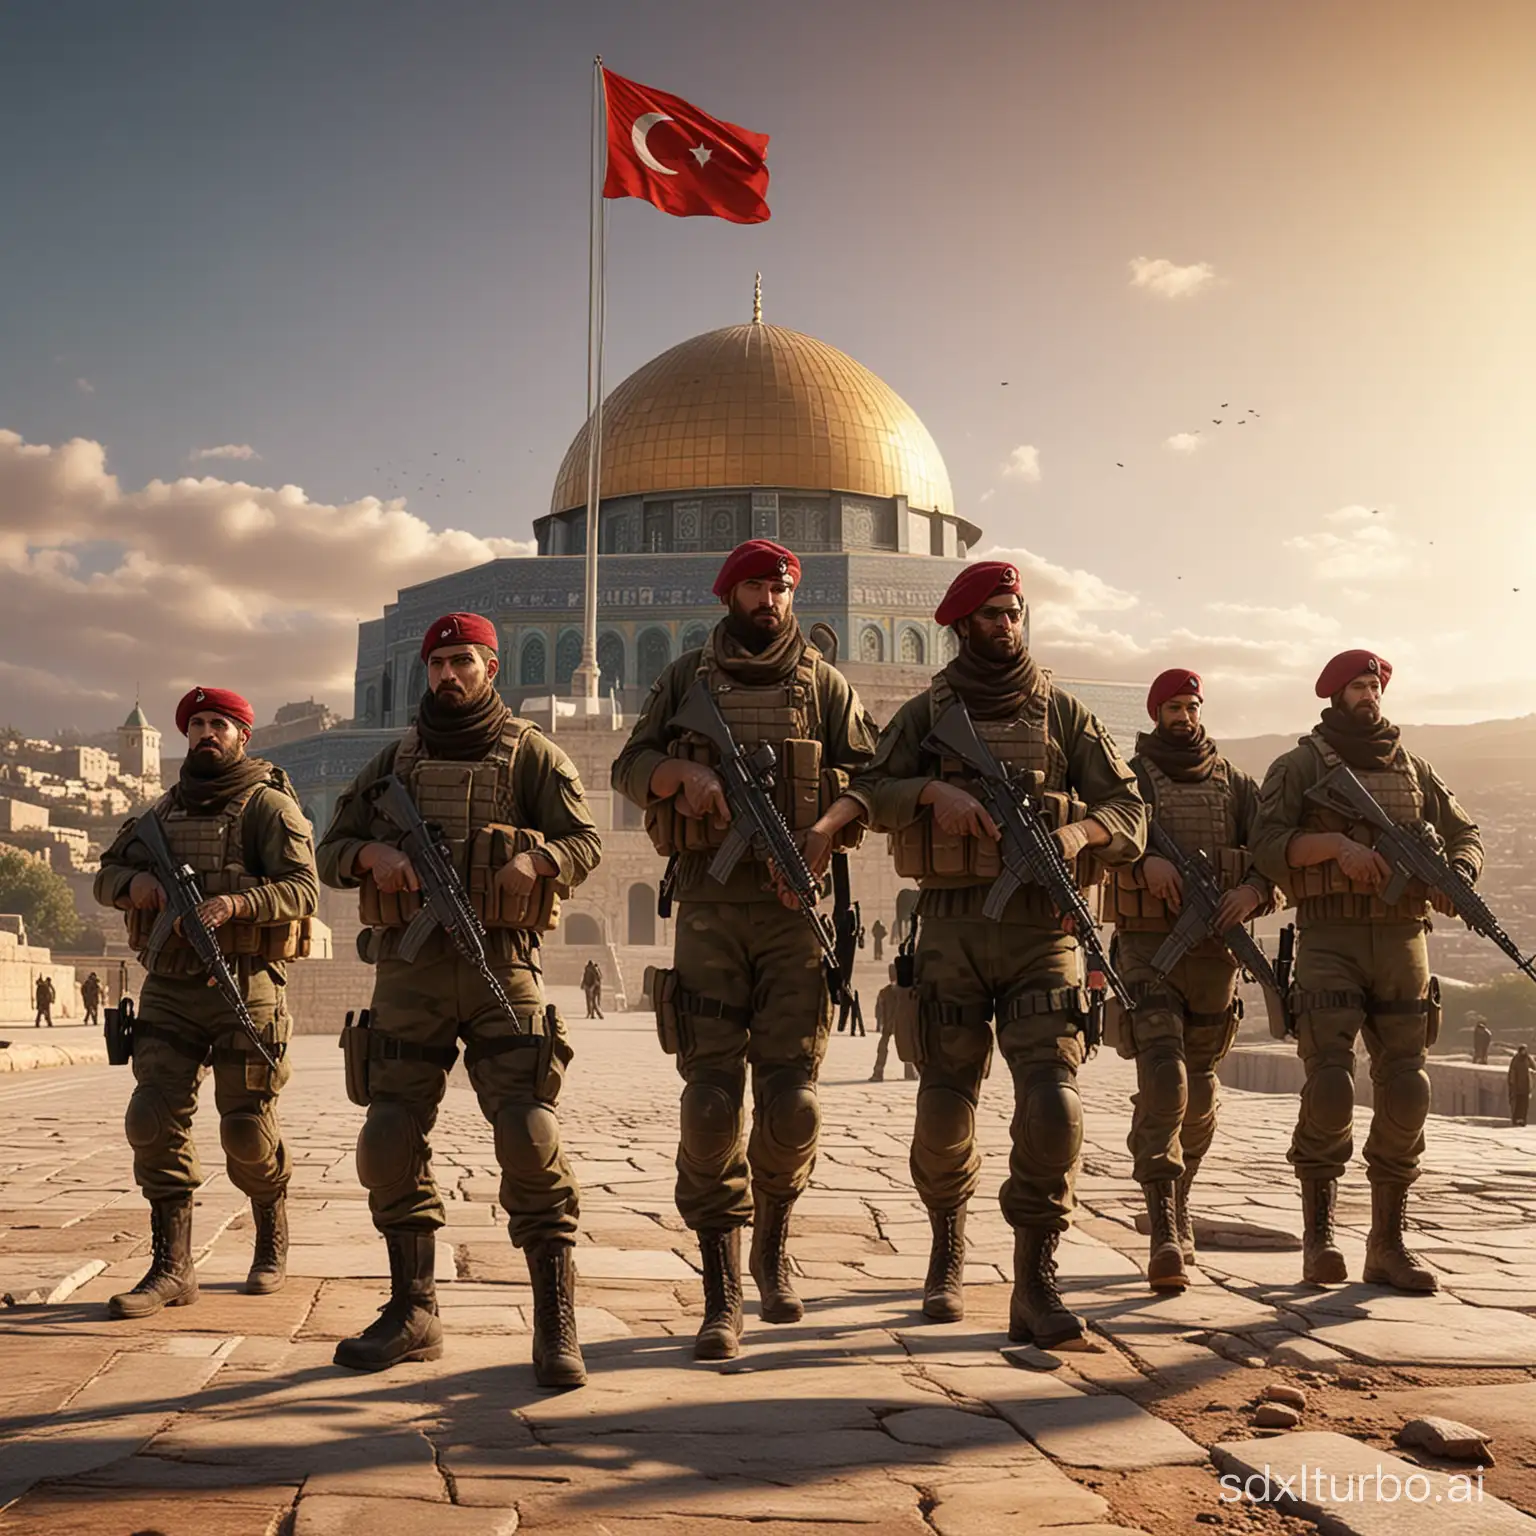 A stunning 3D render of a group of very strong Turkish Special Commando soldiers with maroon beret standing proudly behind the iconic Dome of the Rock. They are dressed in their tactical gear, holding their rifles, and hoisting only one Turkish flag high. İn the Air in the backround a TB-2 turkisch army drone and drones anThe Dome of the Rock is illuminated in a golden hue, casting a warm light on the soldiers. The background reveals a panoramic view of the city, with an atmosphere of strength and unity. The overall feel of the image is cinematic and patriotic, perfect for an inspiring poster., photo, cinematic, poster, 3d render